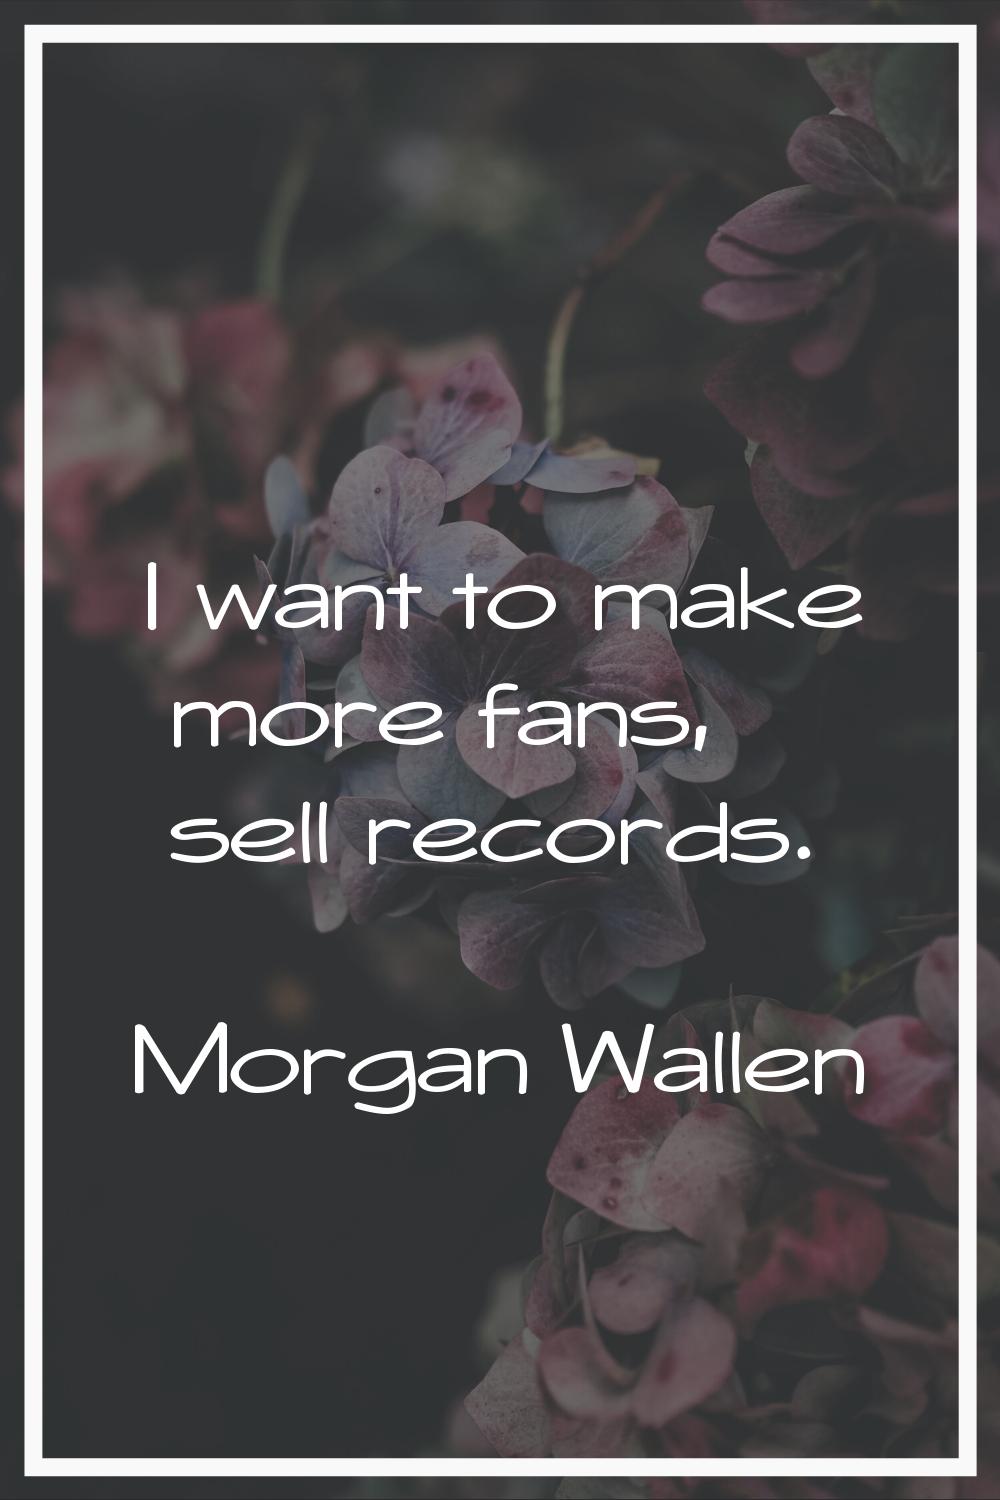 I want to make more fans, sell records.